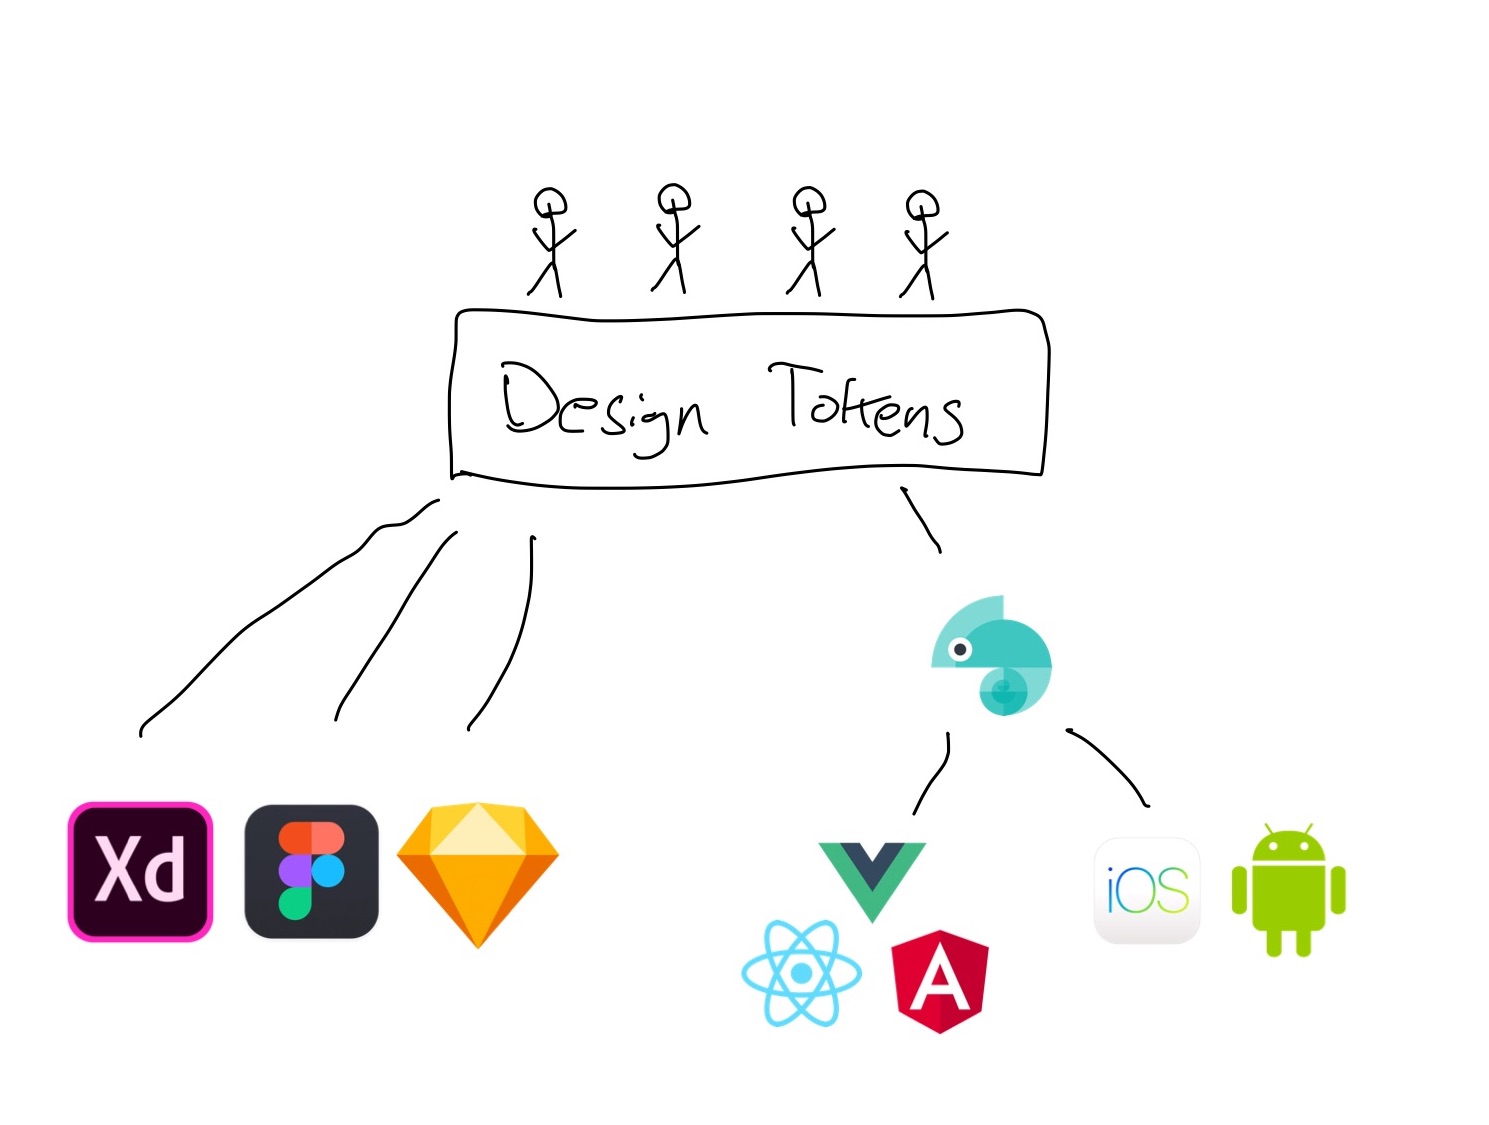 an example diagram of how design tokens can output to multiple platforms